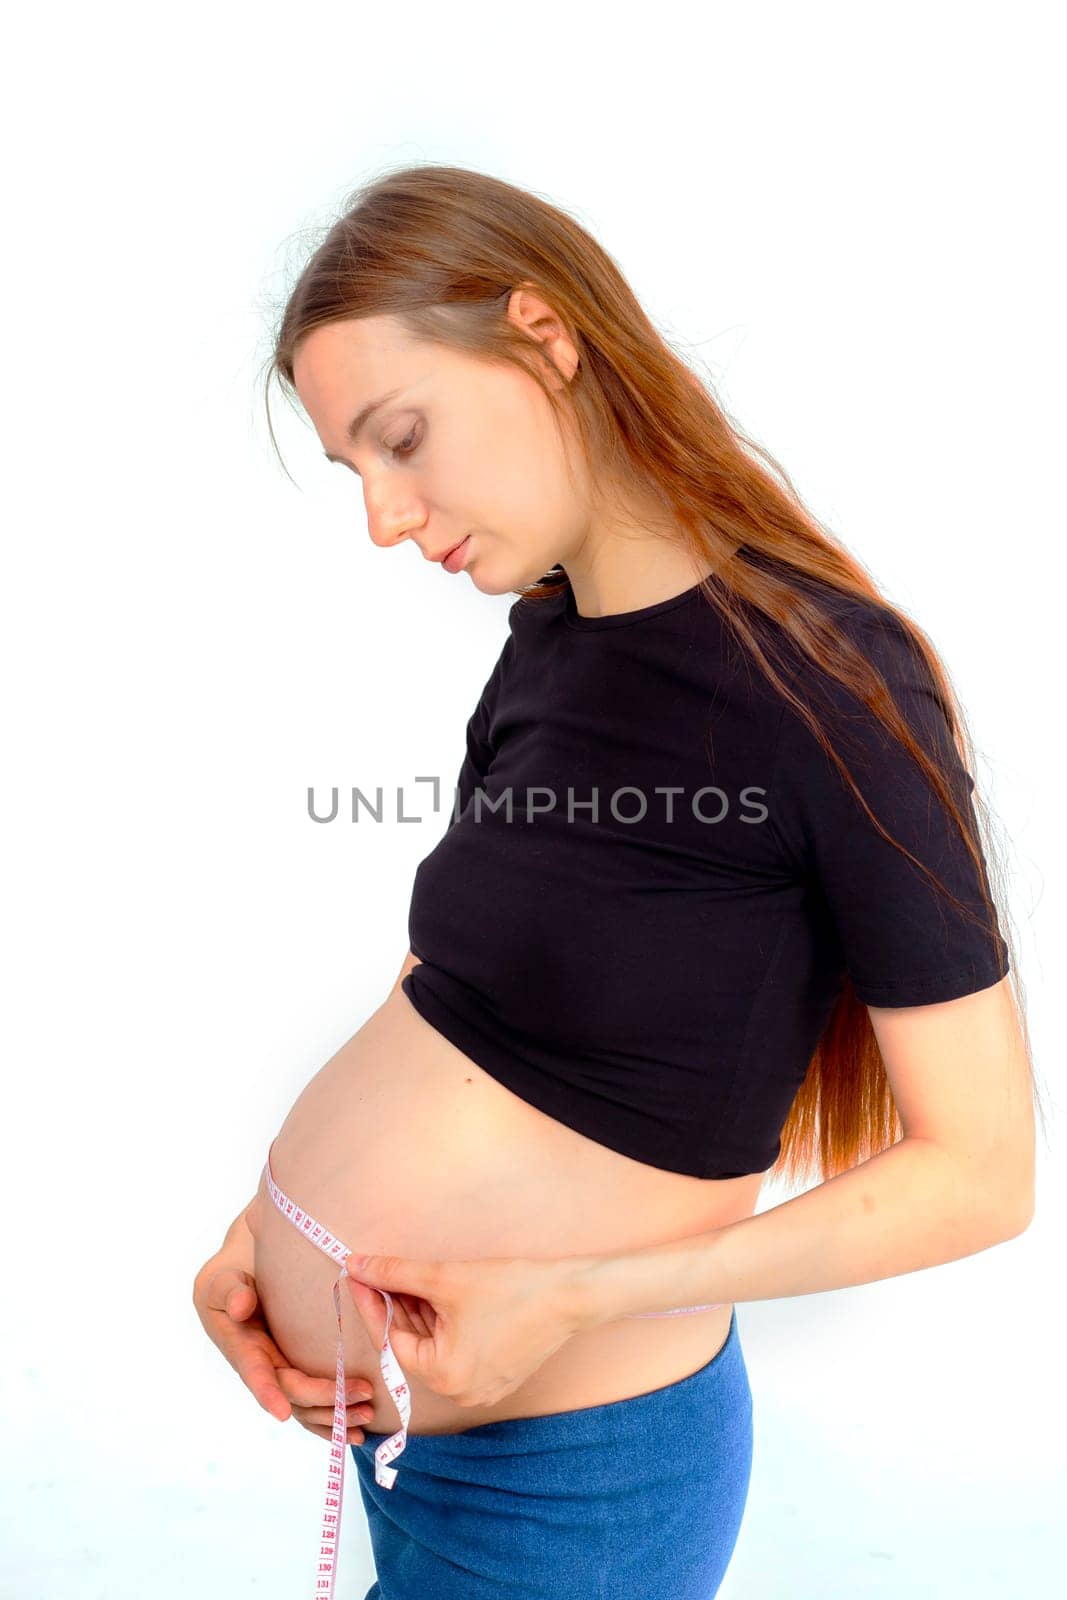 Pregnant woman measuring stomach with measuring tape. High quality photo